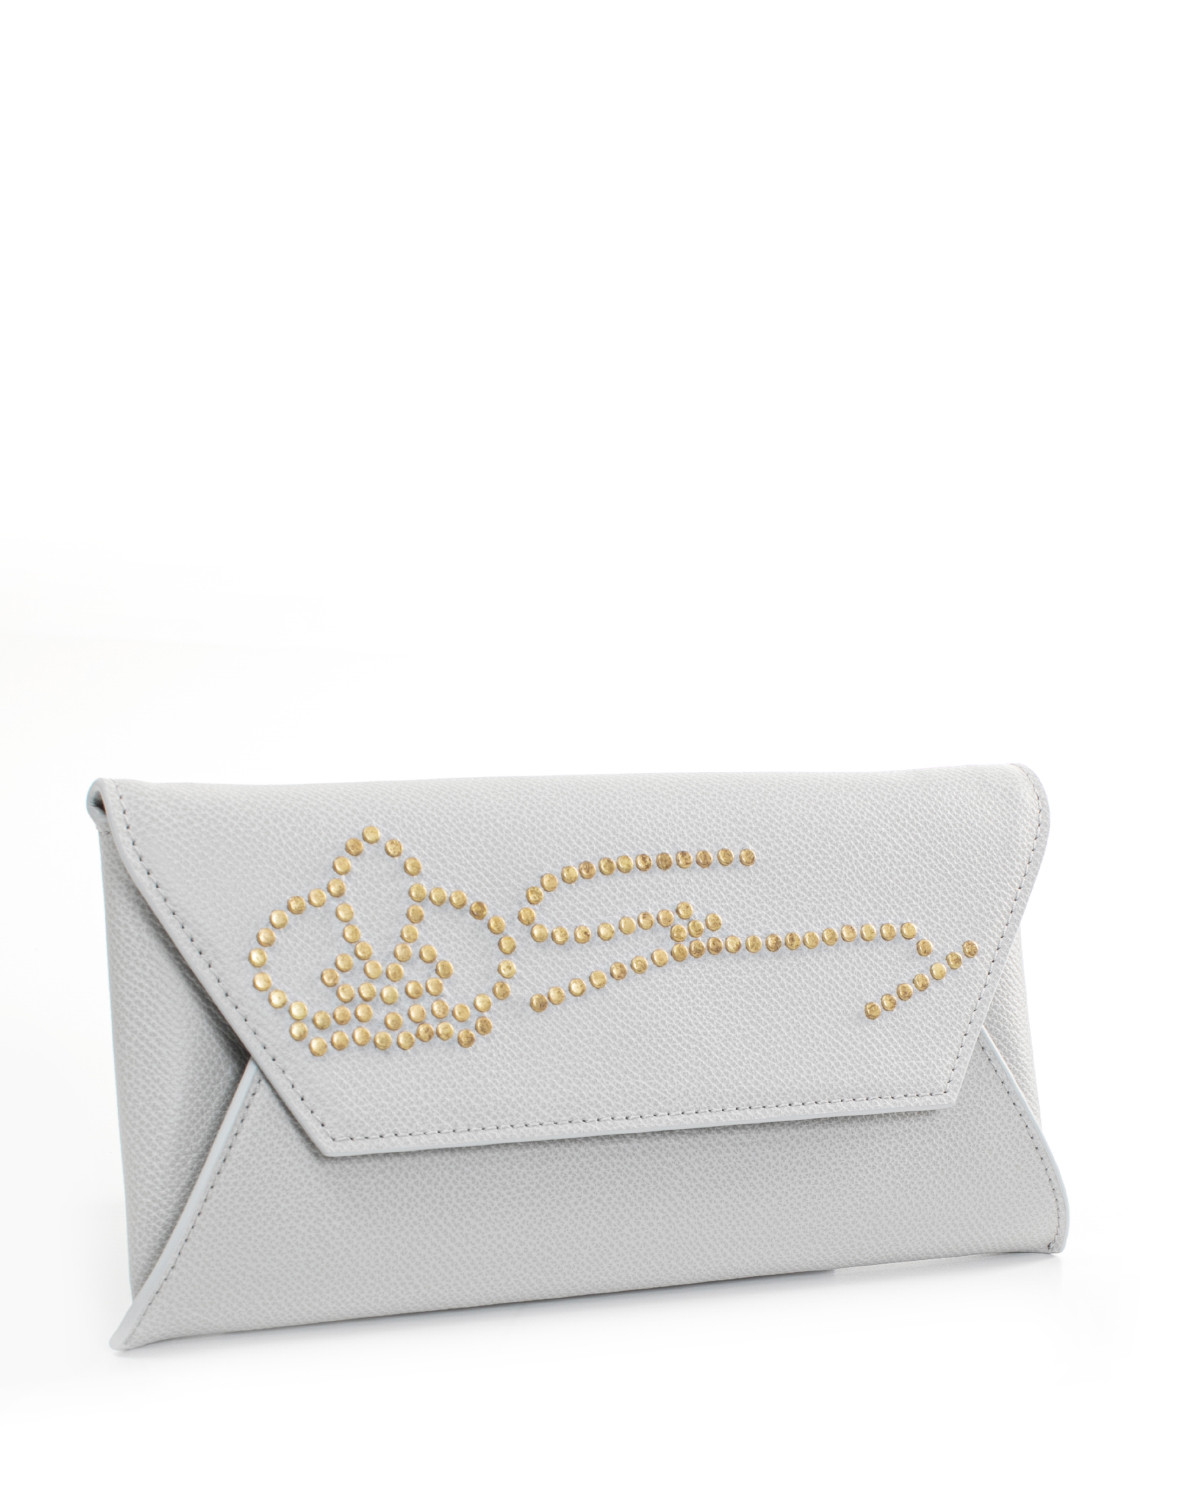 Grey granulated leather envelope clutch